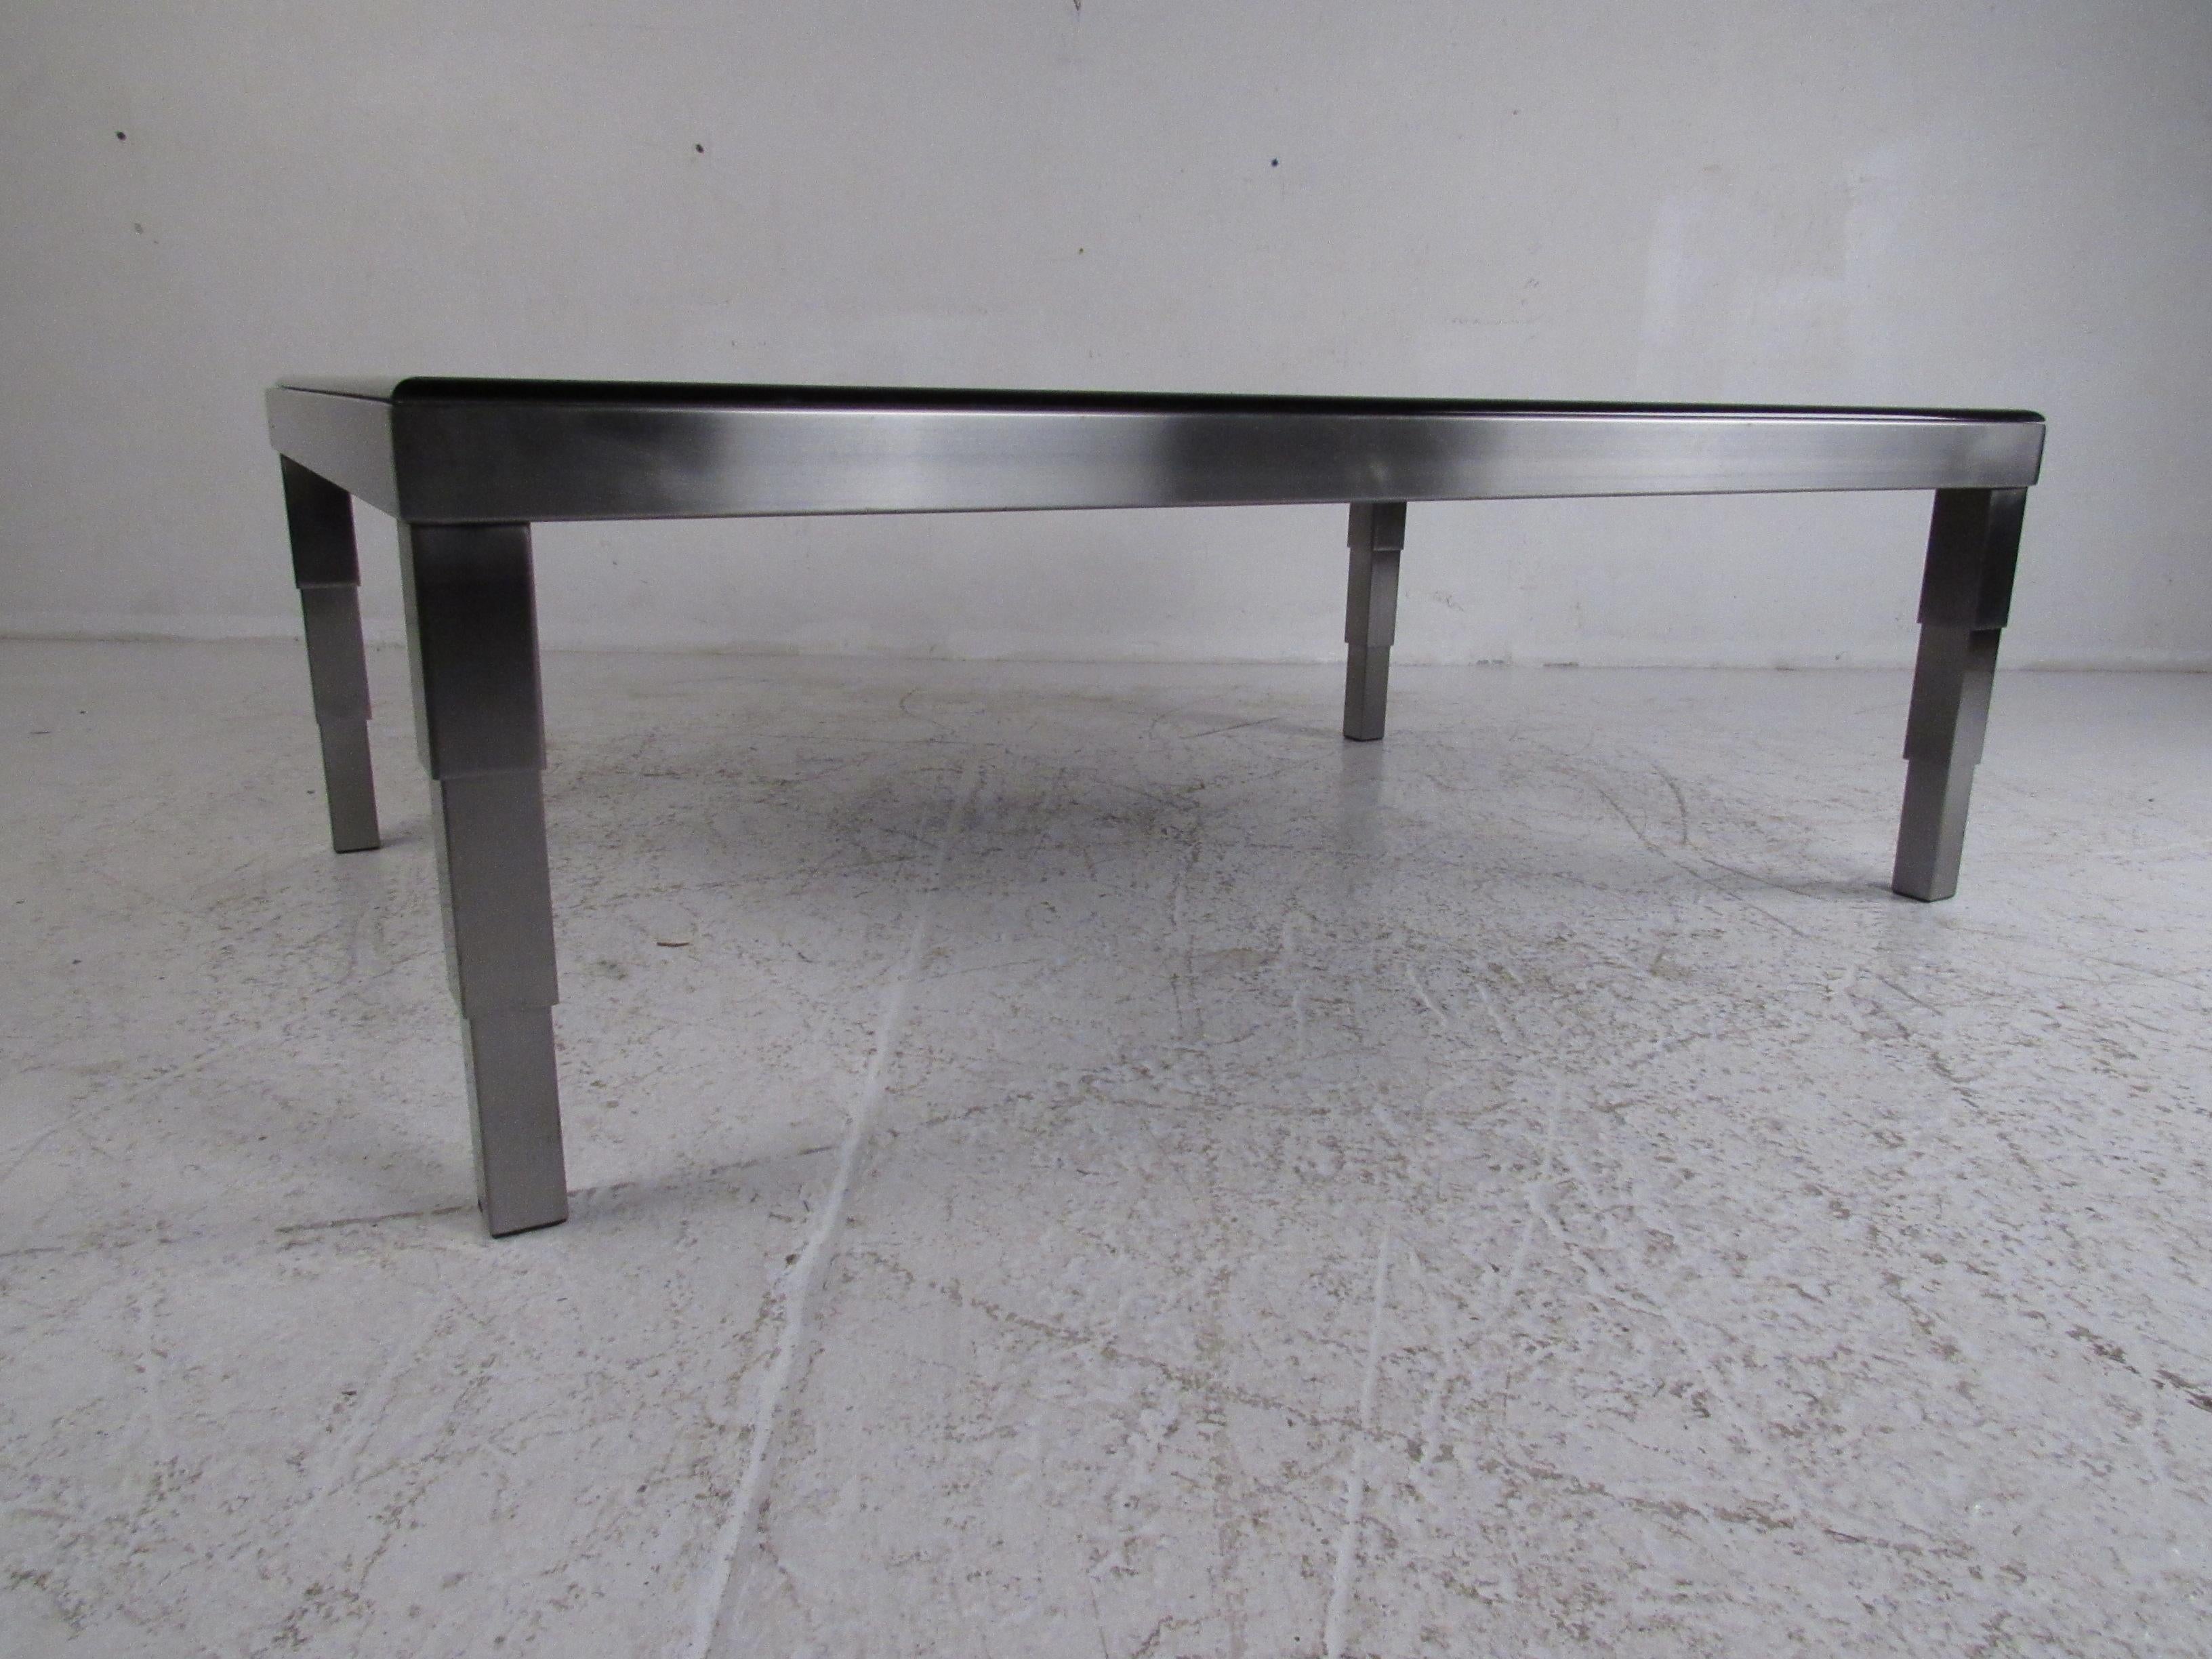 This stunning vintage modern coffee table boasts a stainless steel base with unique legs that graduate downward. A smoked rectangular piece of glass with beveled edges sits comfortably on top. This stylish retro style coffee table makes the perfect